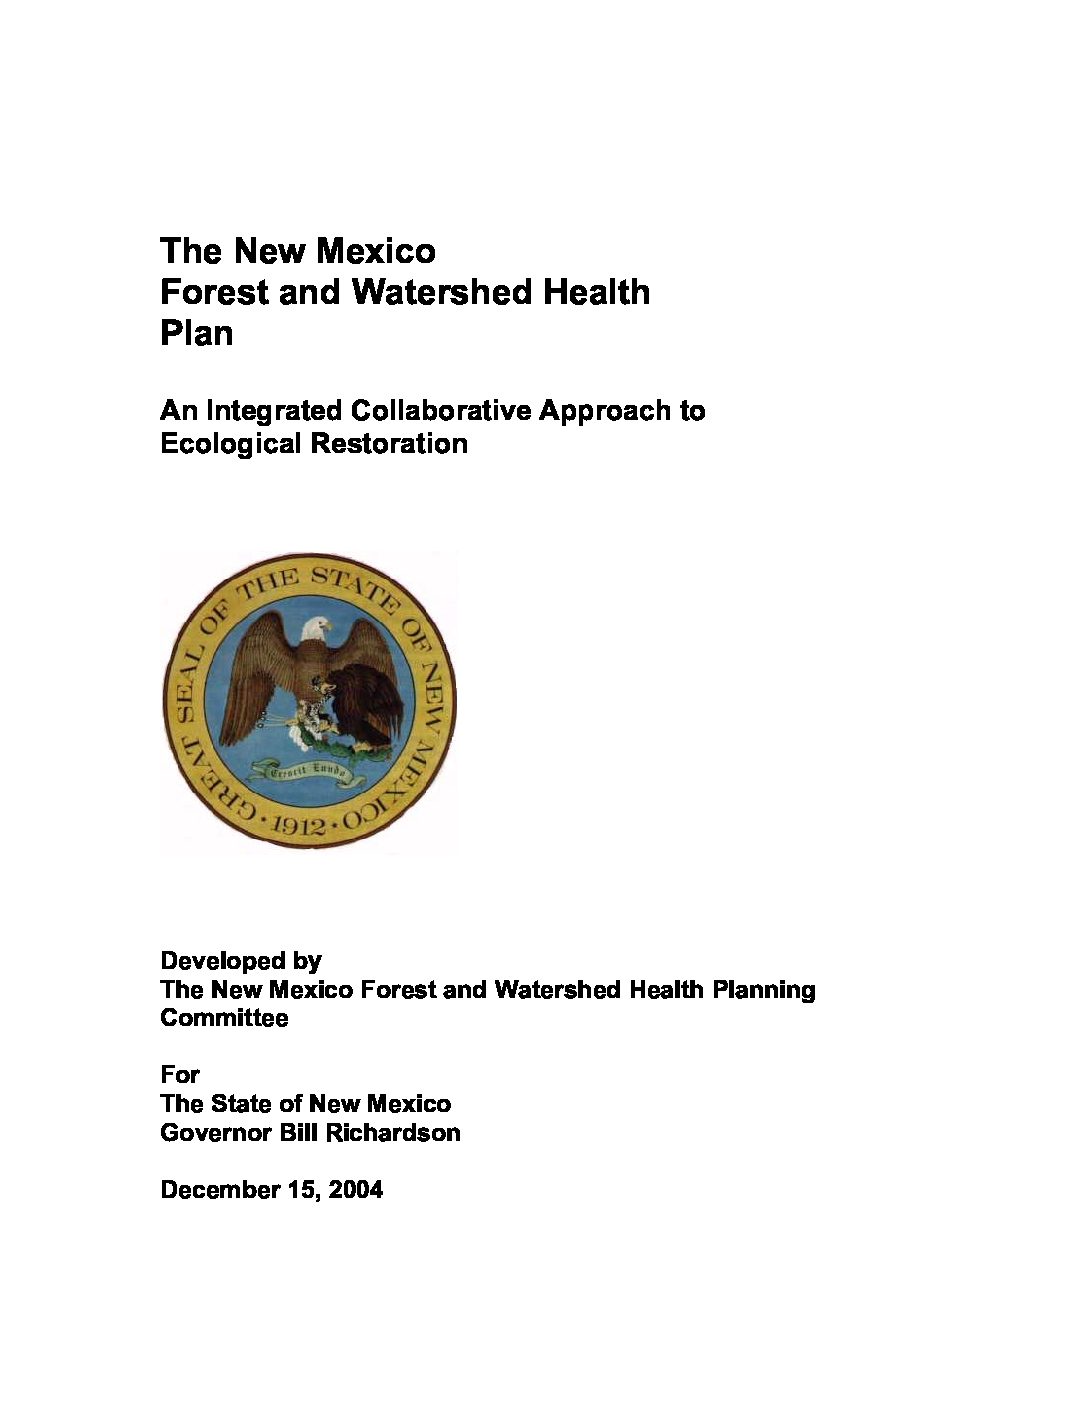 The New Mexico Forest and Watershed Health Plan